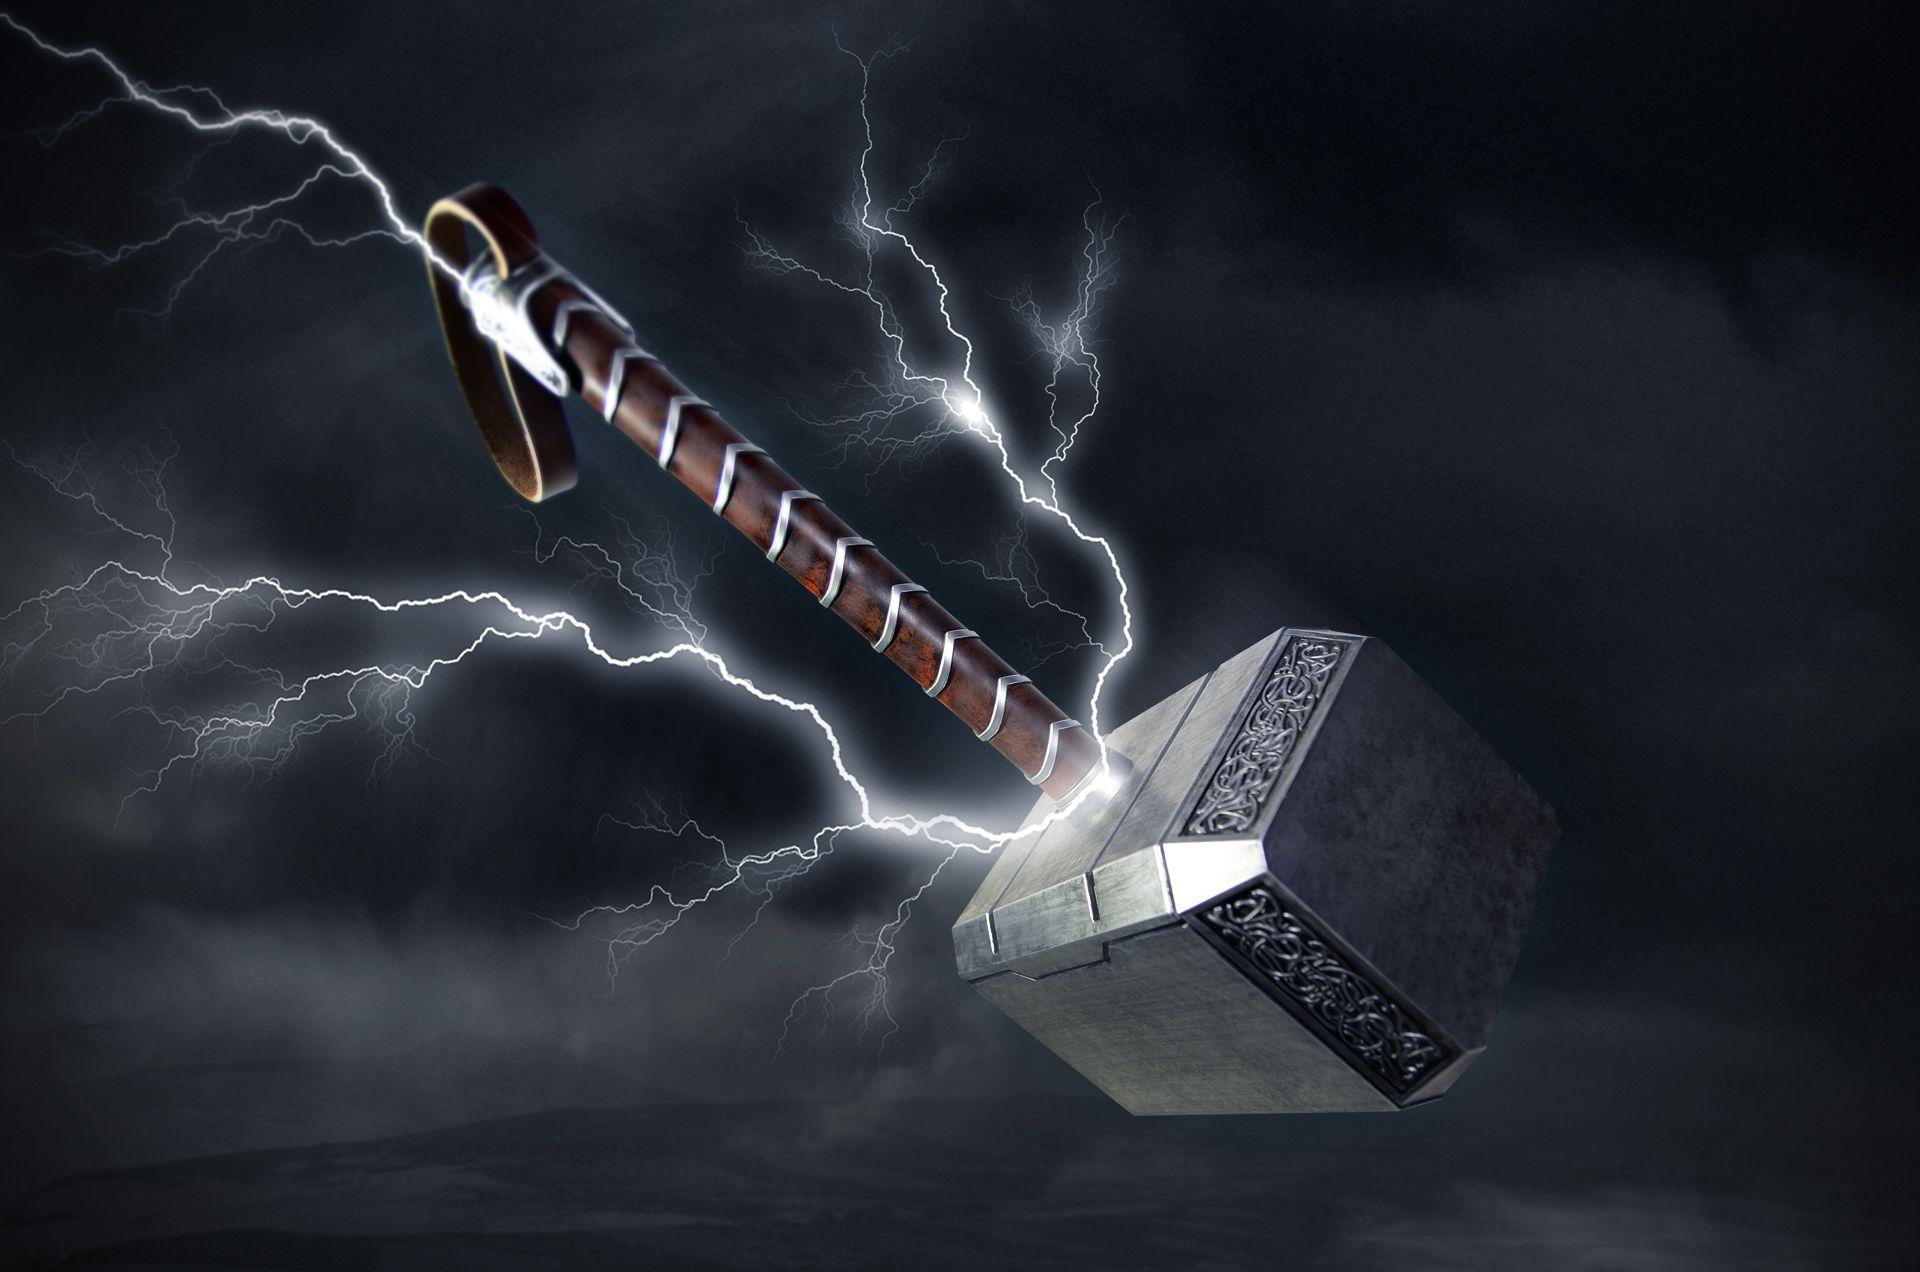 Thor Hammer Phone Wallpaper with High Resolution 1920x1272 px 001.18 KB. Thor wallpaper, Thors hammer, Avengers wallpaper